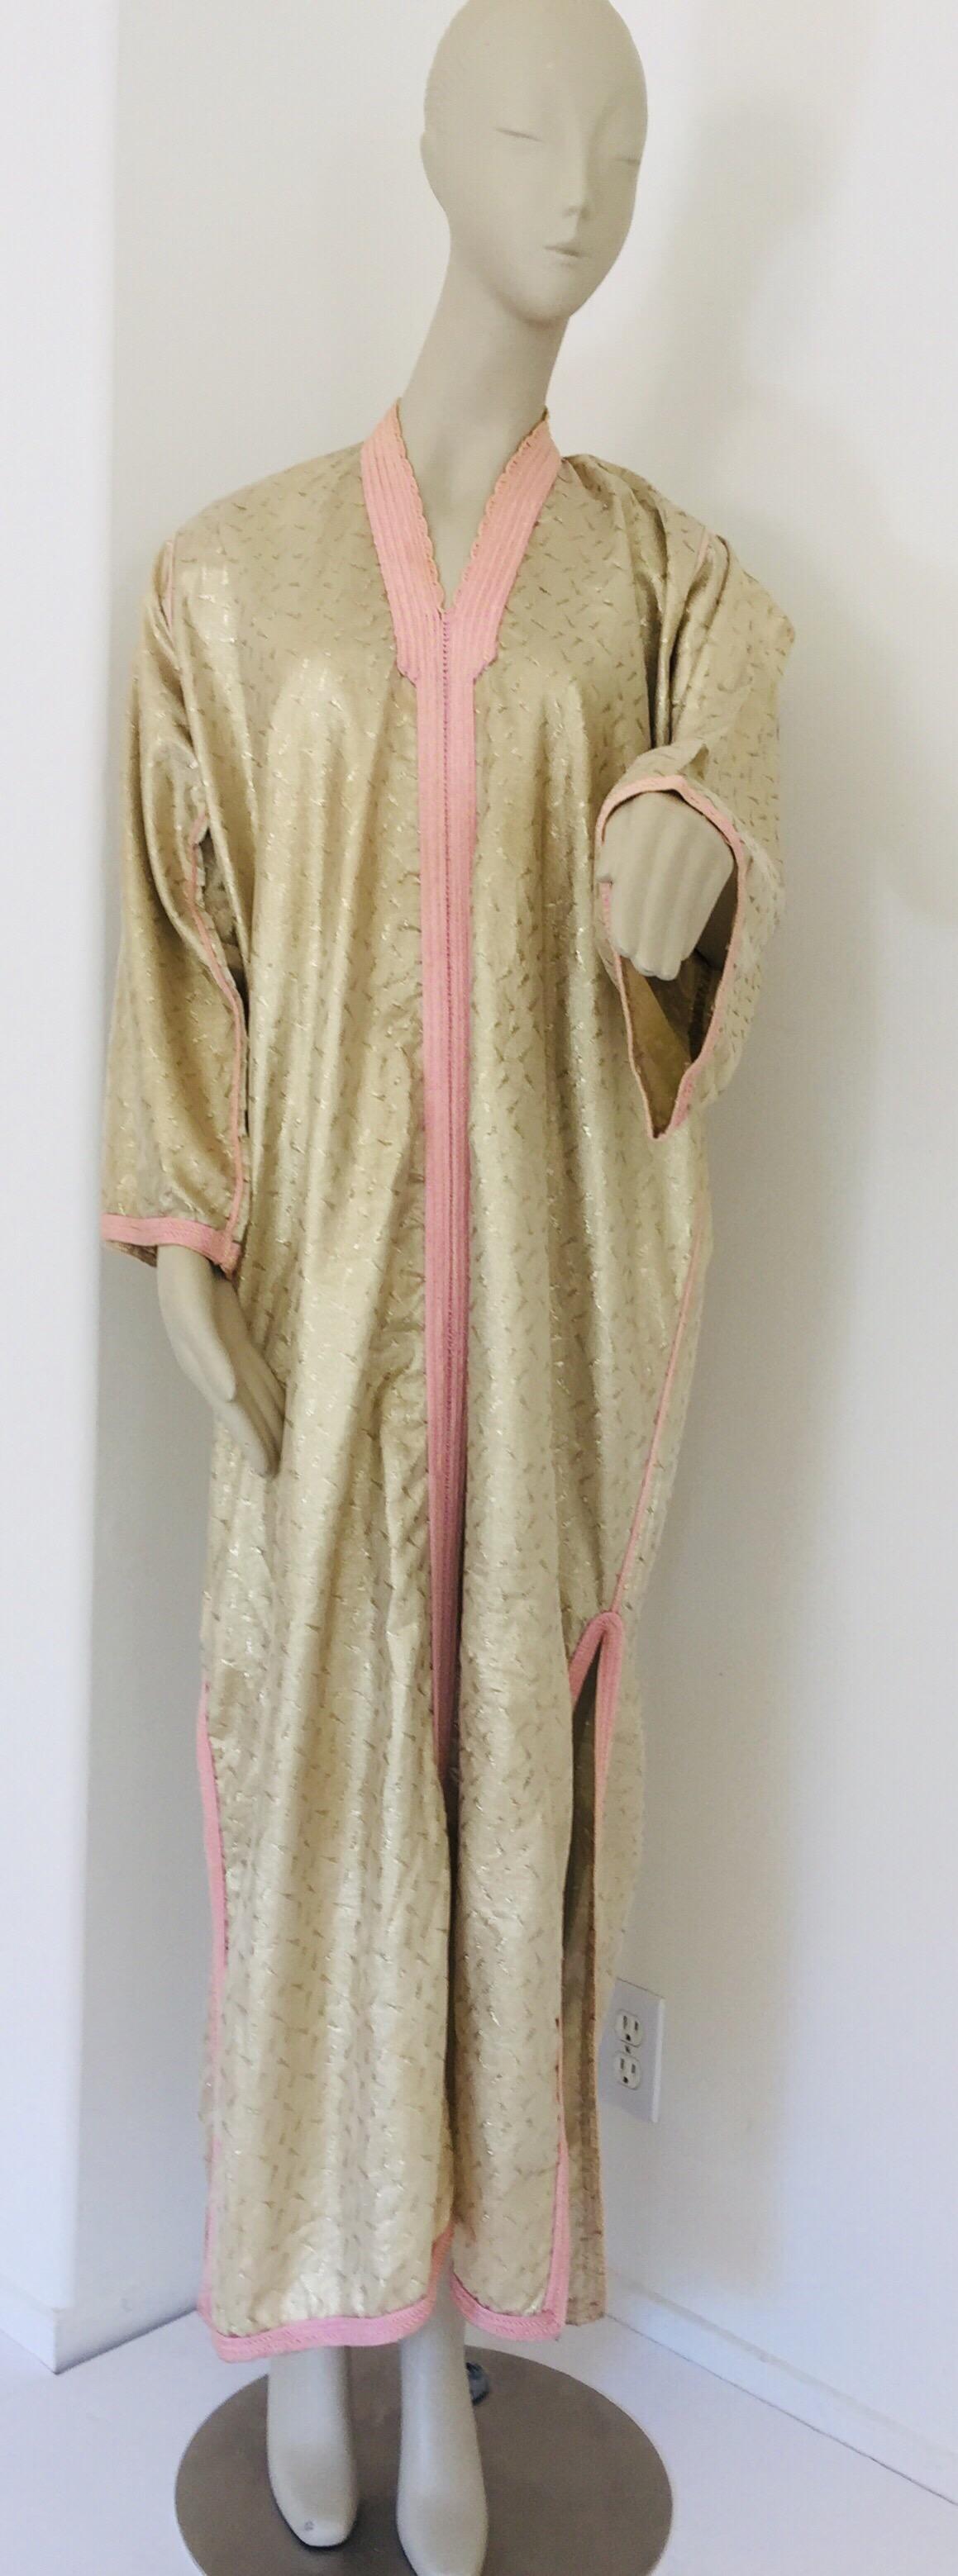 1970s Metallic Gold Moroccan Caftan, Kaftan Maxi Dress North Africa, Morocco In Good Condition For Sale In North Hollywood, CA